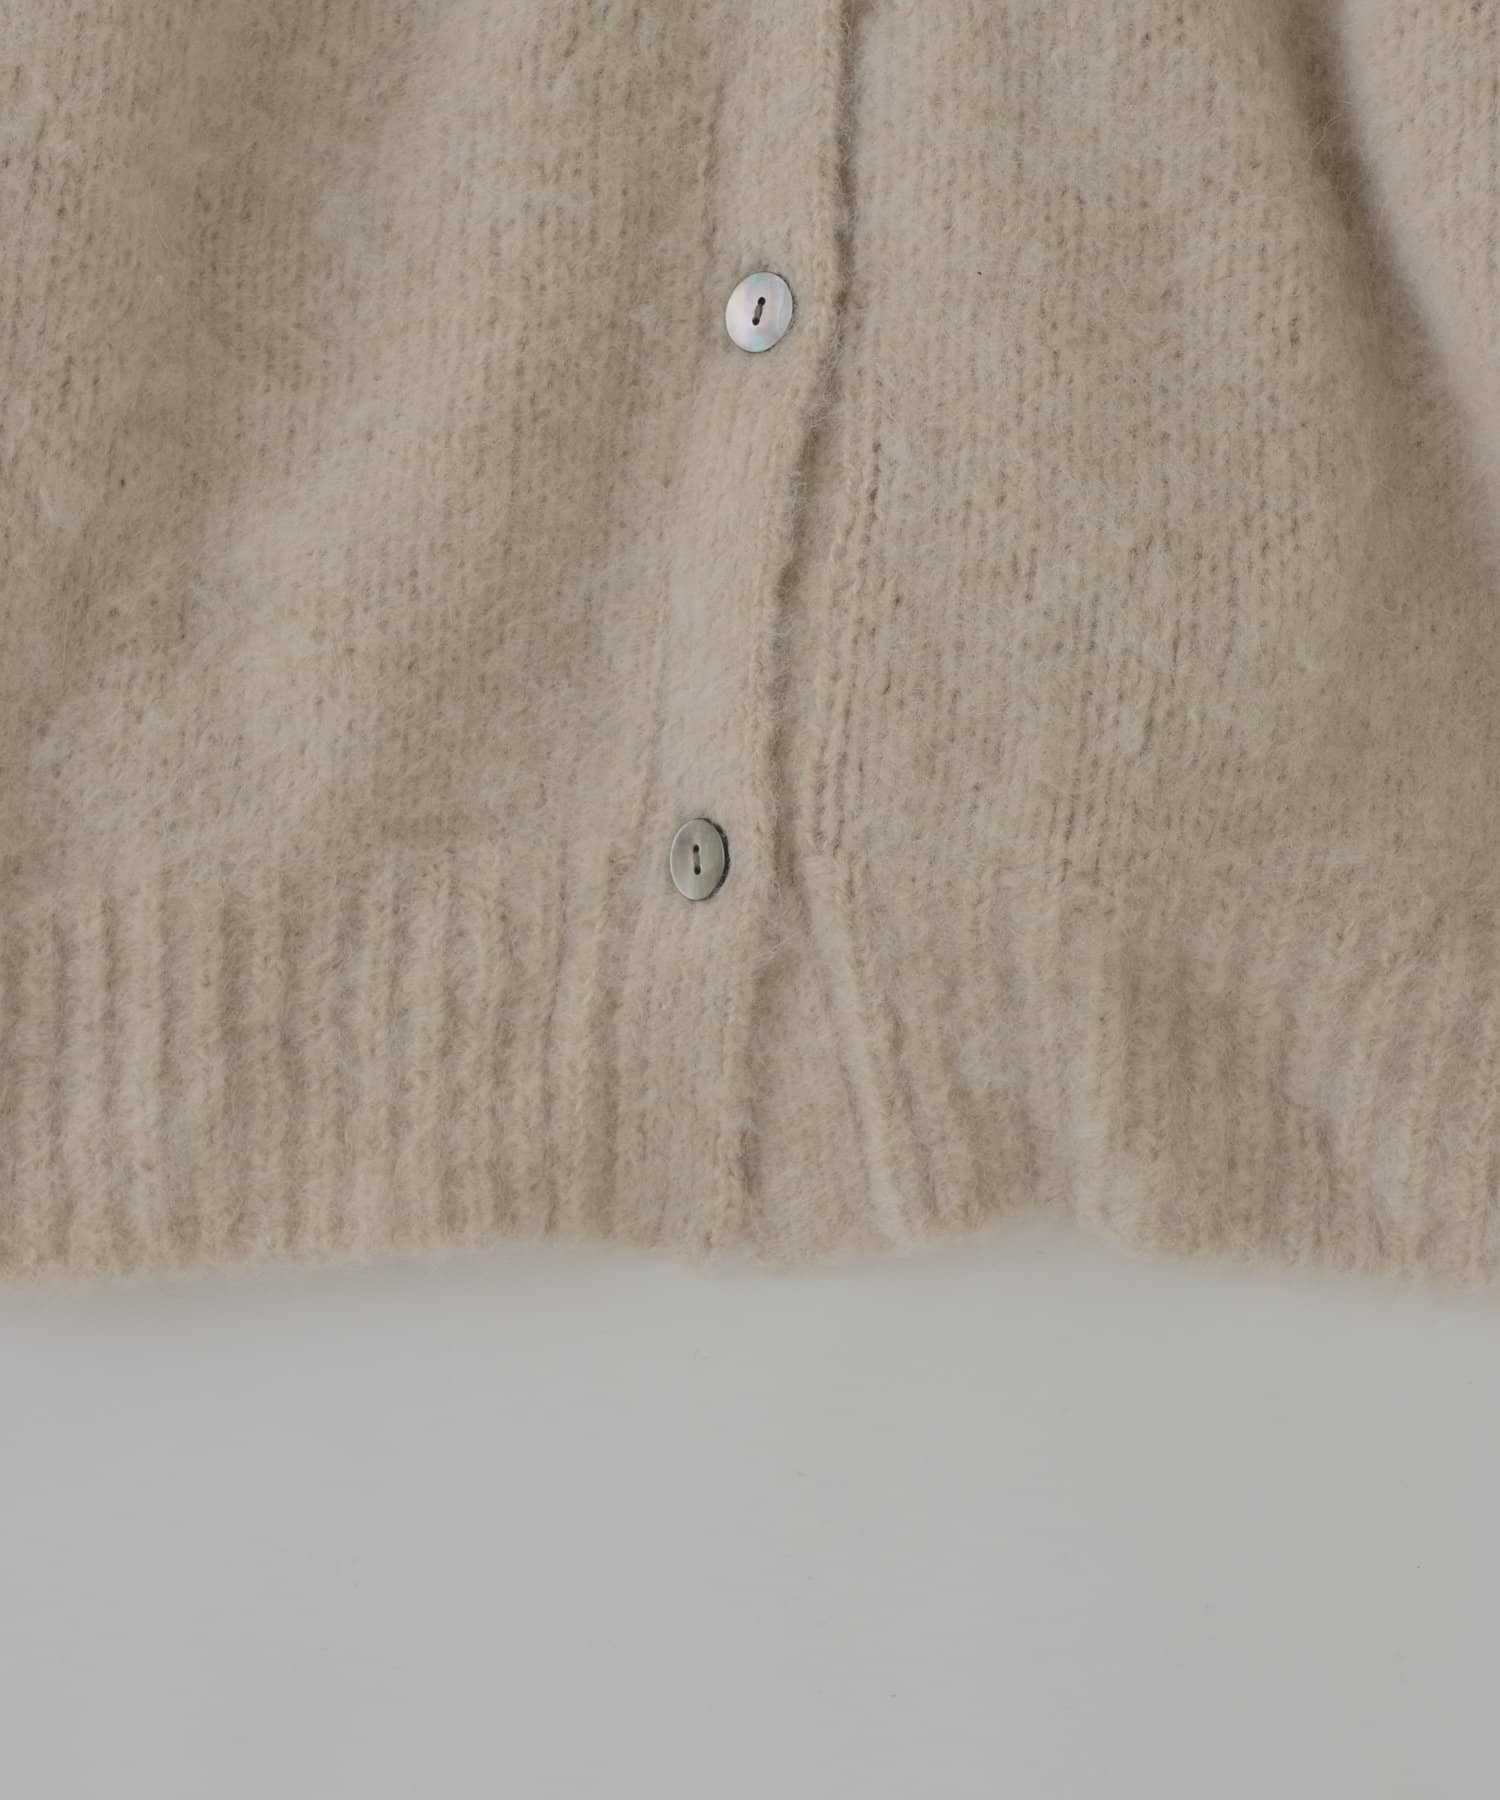 Cut out cable knit cardigan | Pasterip(パセリ)レディース | PAL